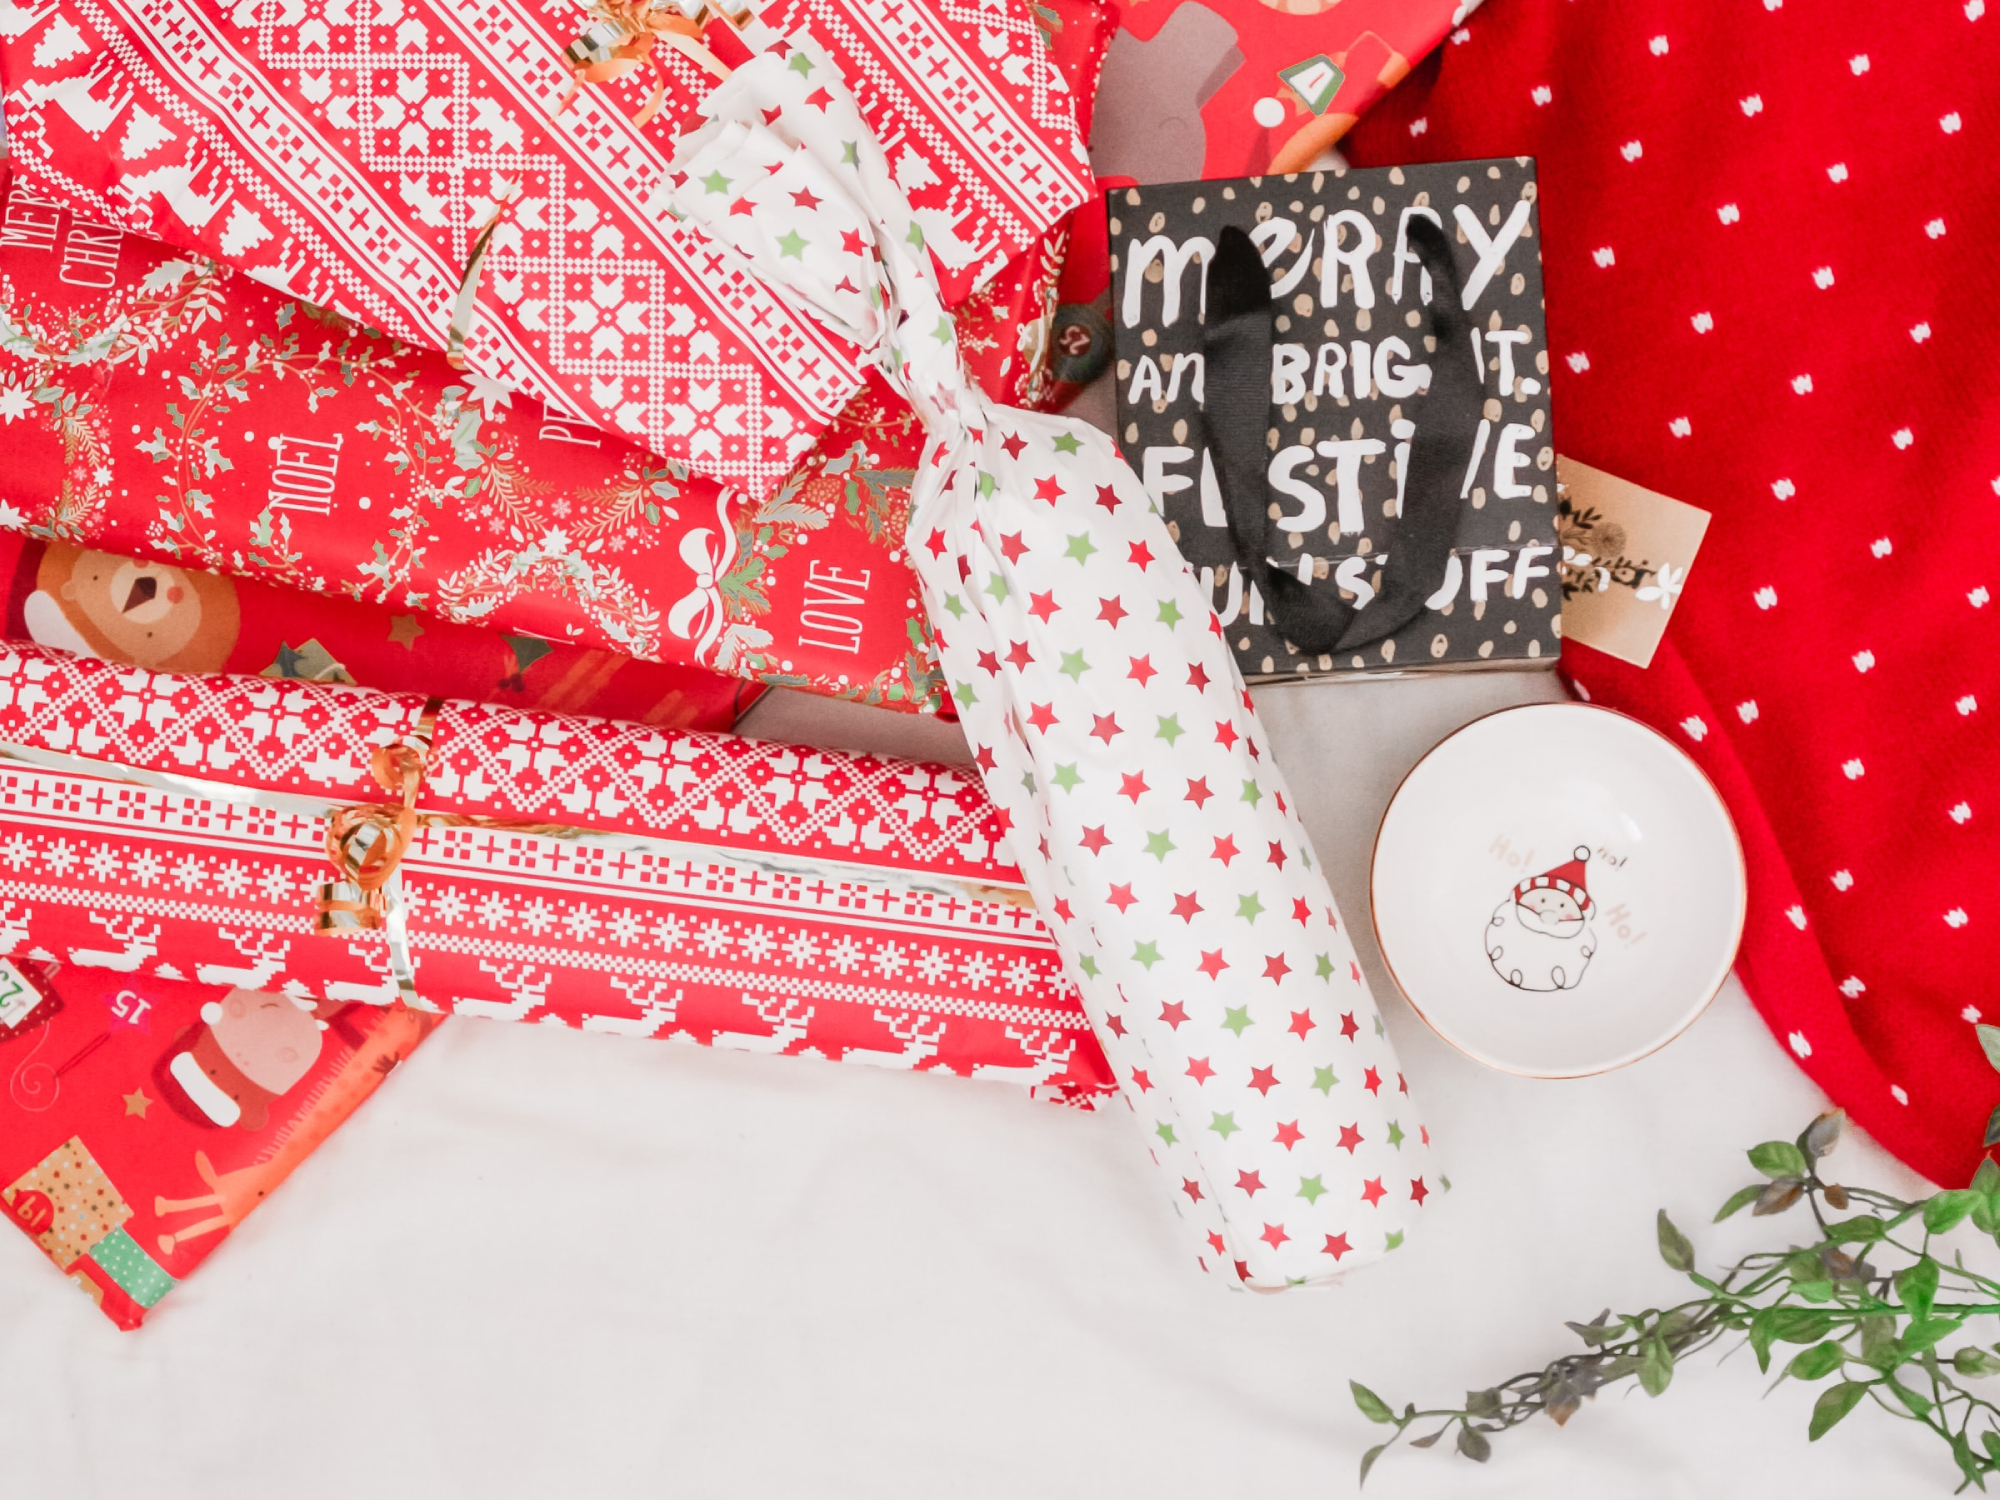 The simple way to wrap round gifts 🎁 cut enough paper to wrap around , How To Wrap A Presents